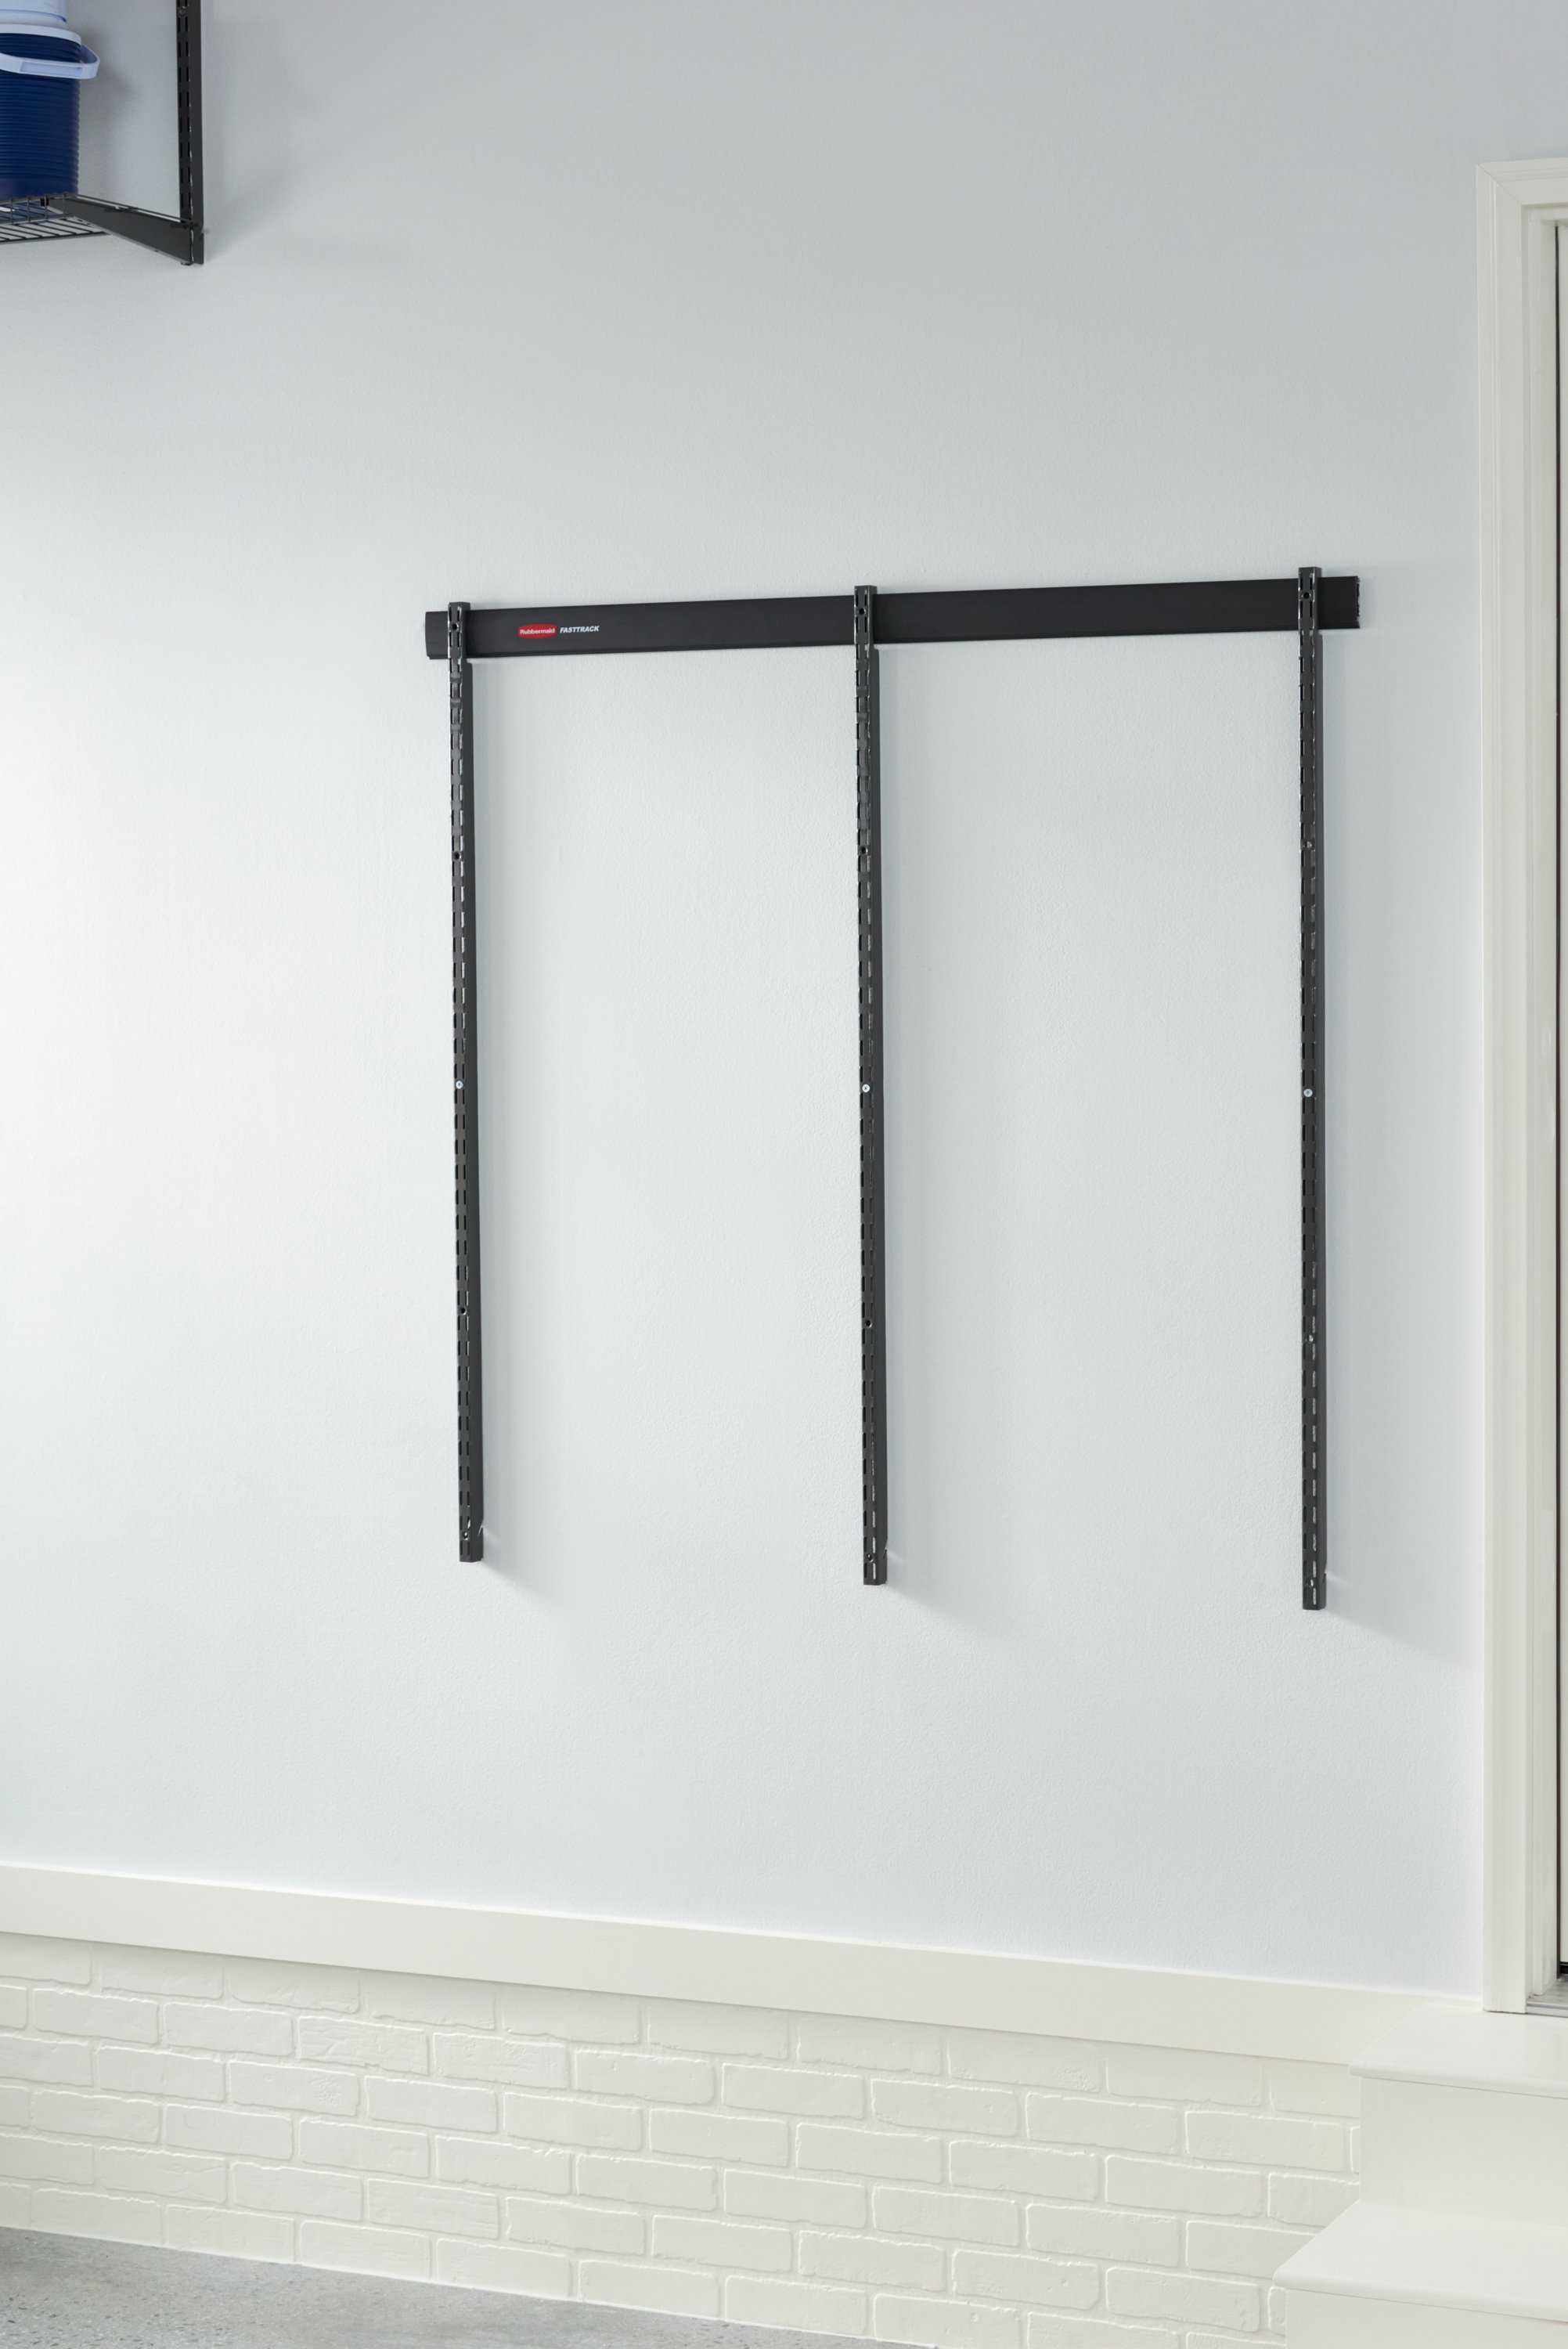 Rubbermaid Fast Track 48 inch Steel Horizontal Wall Mounted